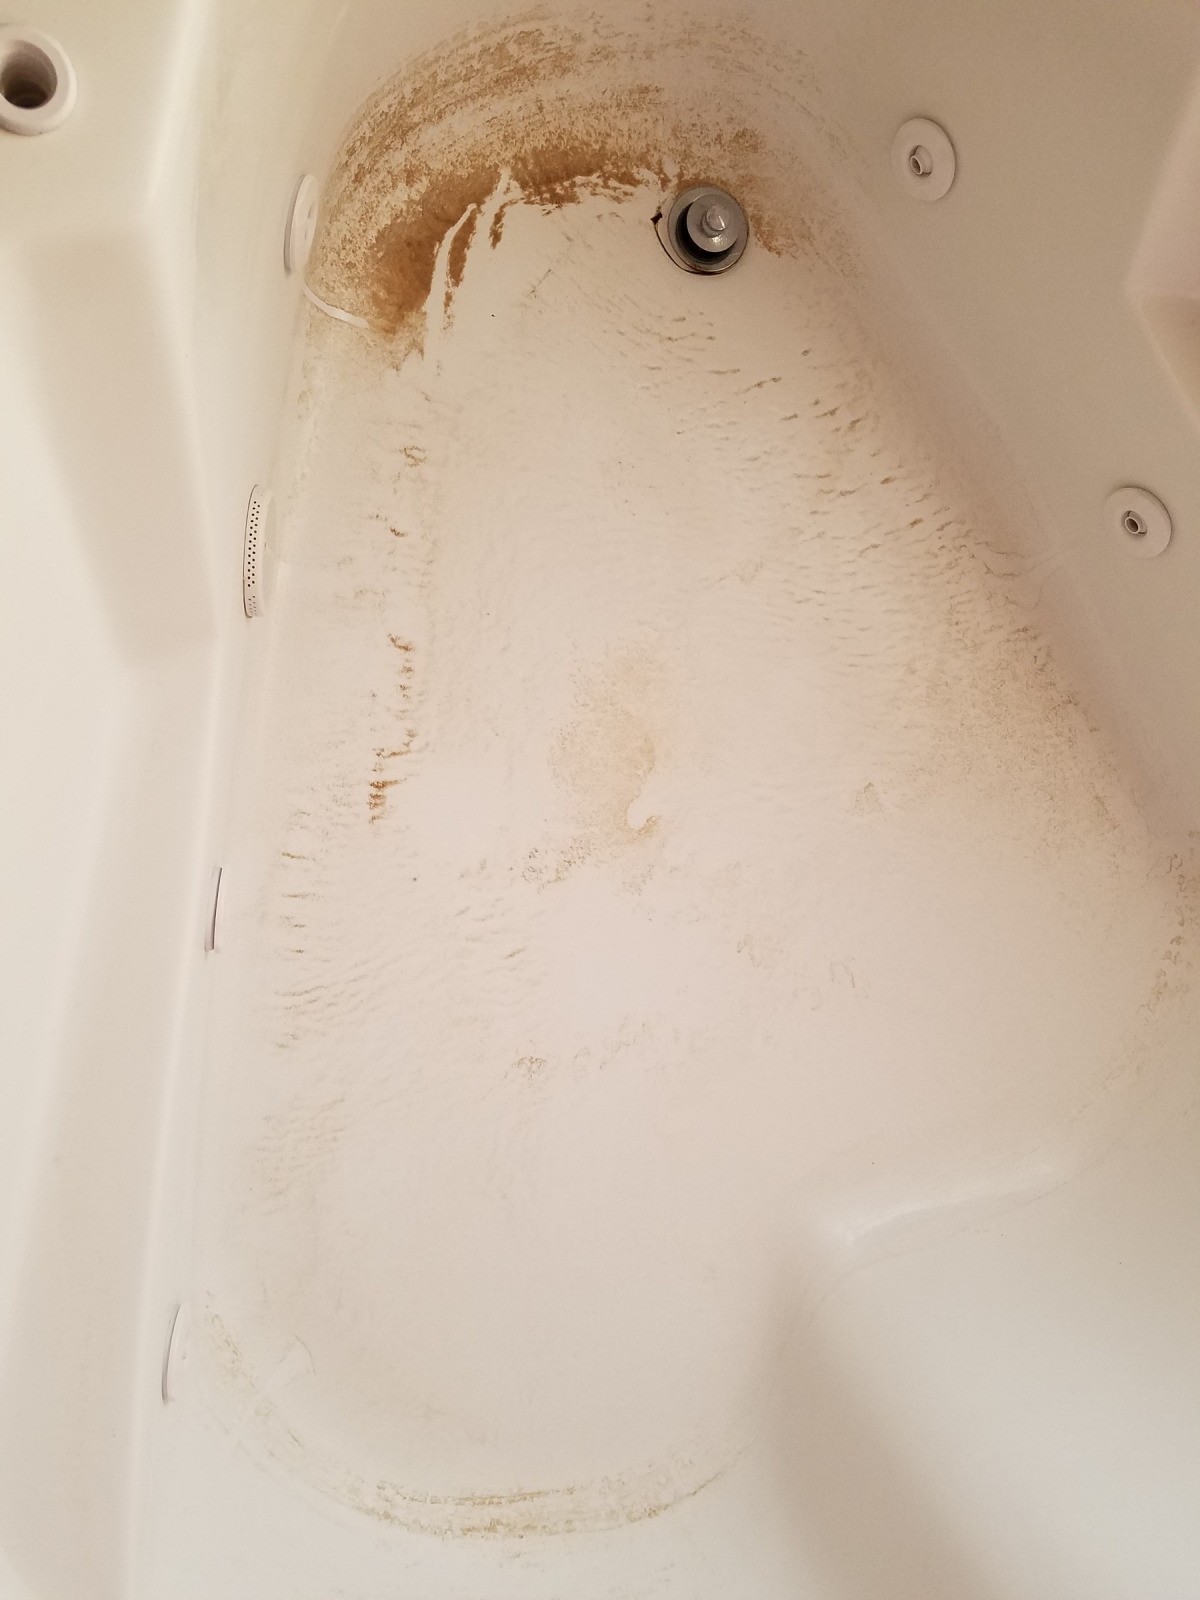 Jacuzzi Bathtub Has Sand In Water Pipes, How To Remove Rust From Bottom Of Bathtub